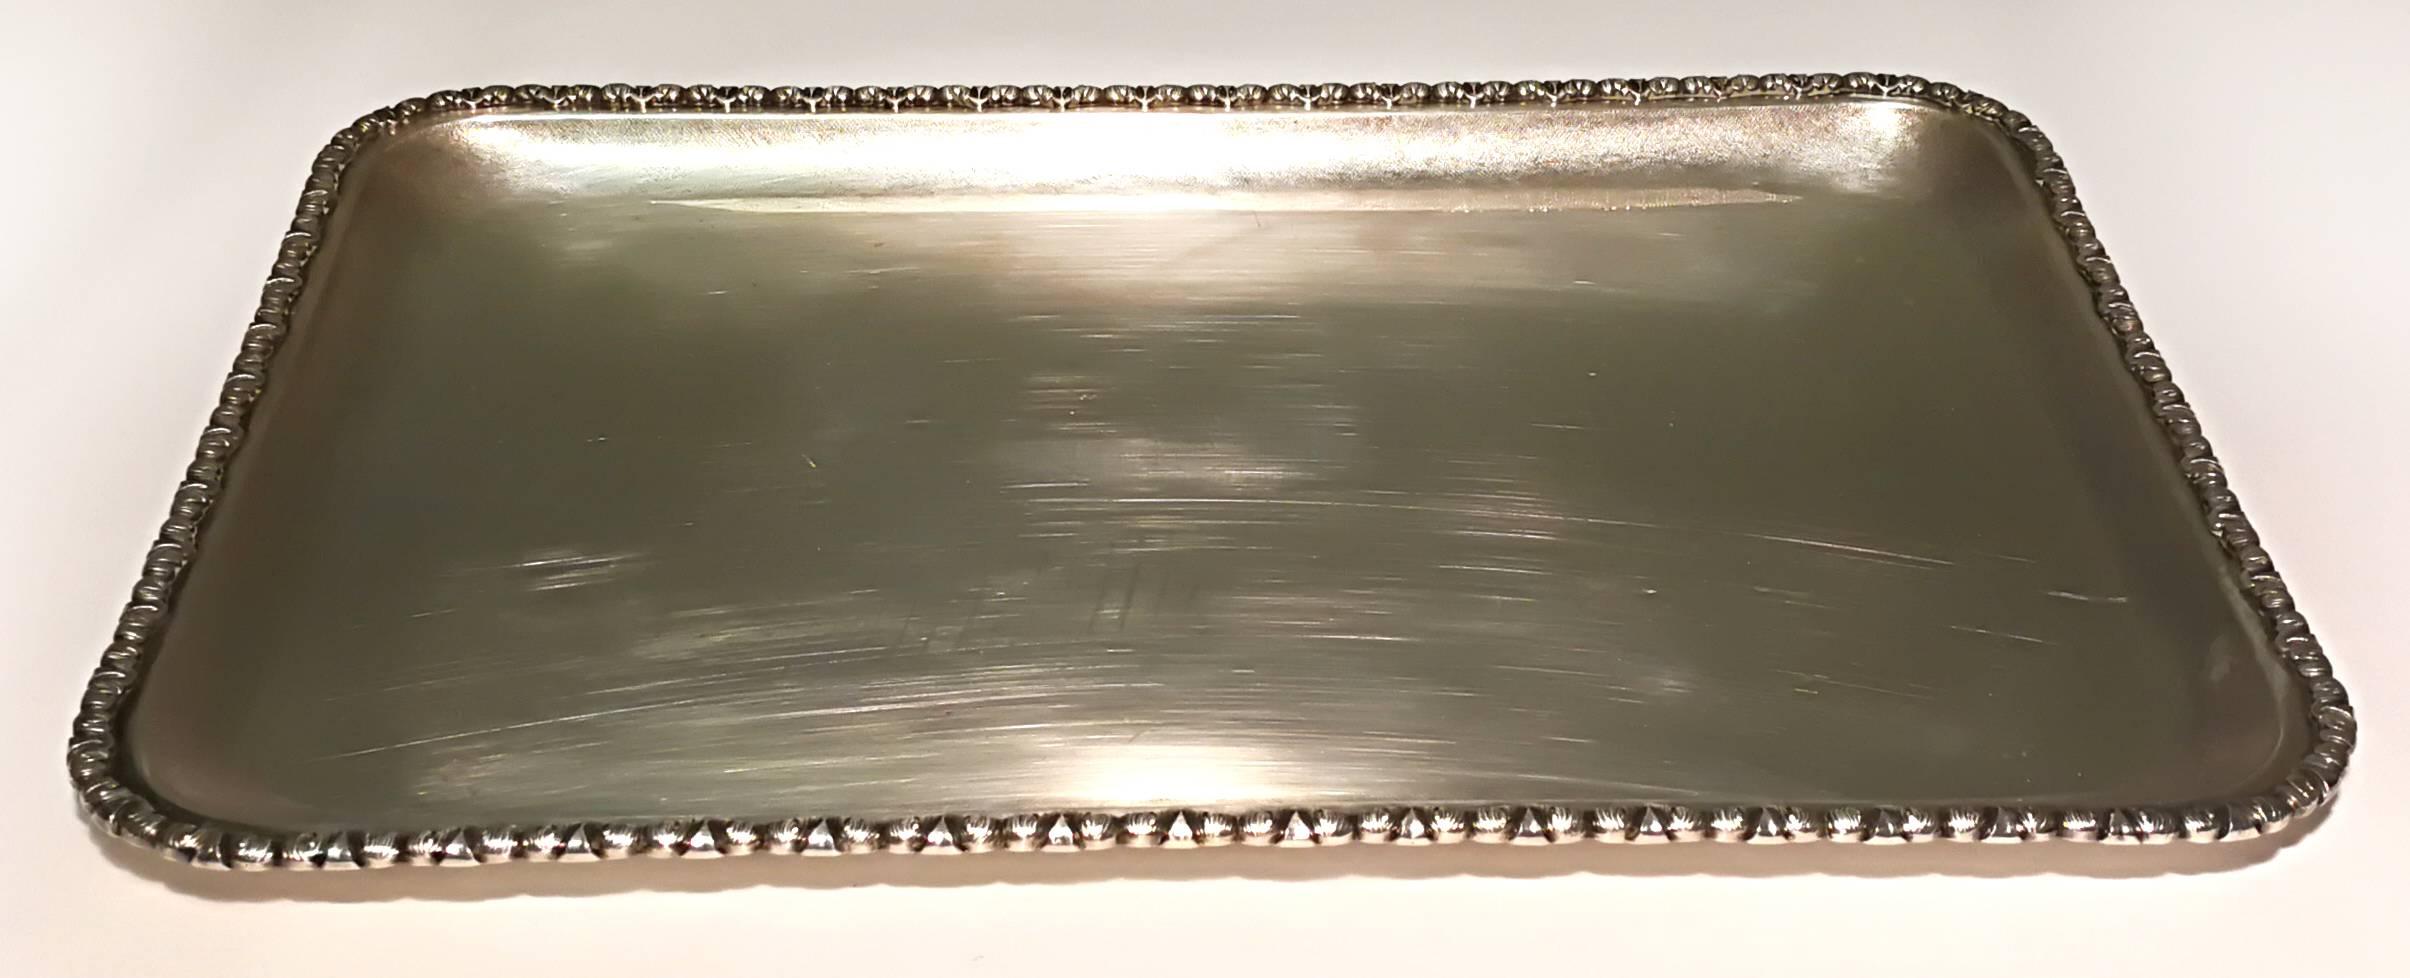 Very nice silver tray with decorated edge.

Good conditions.